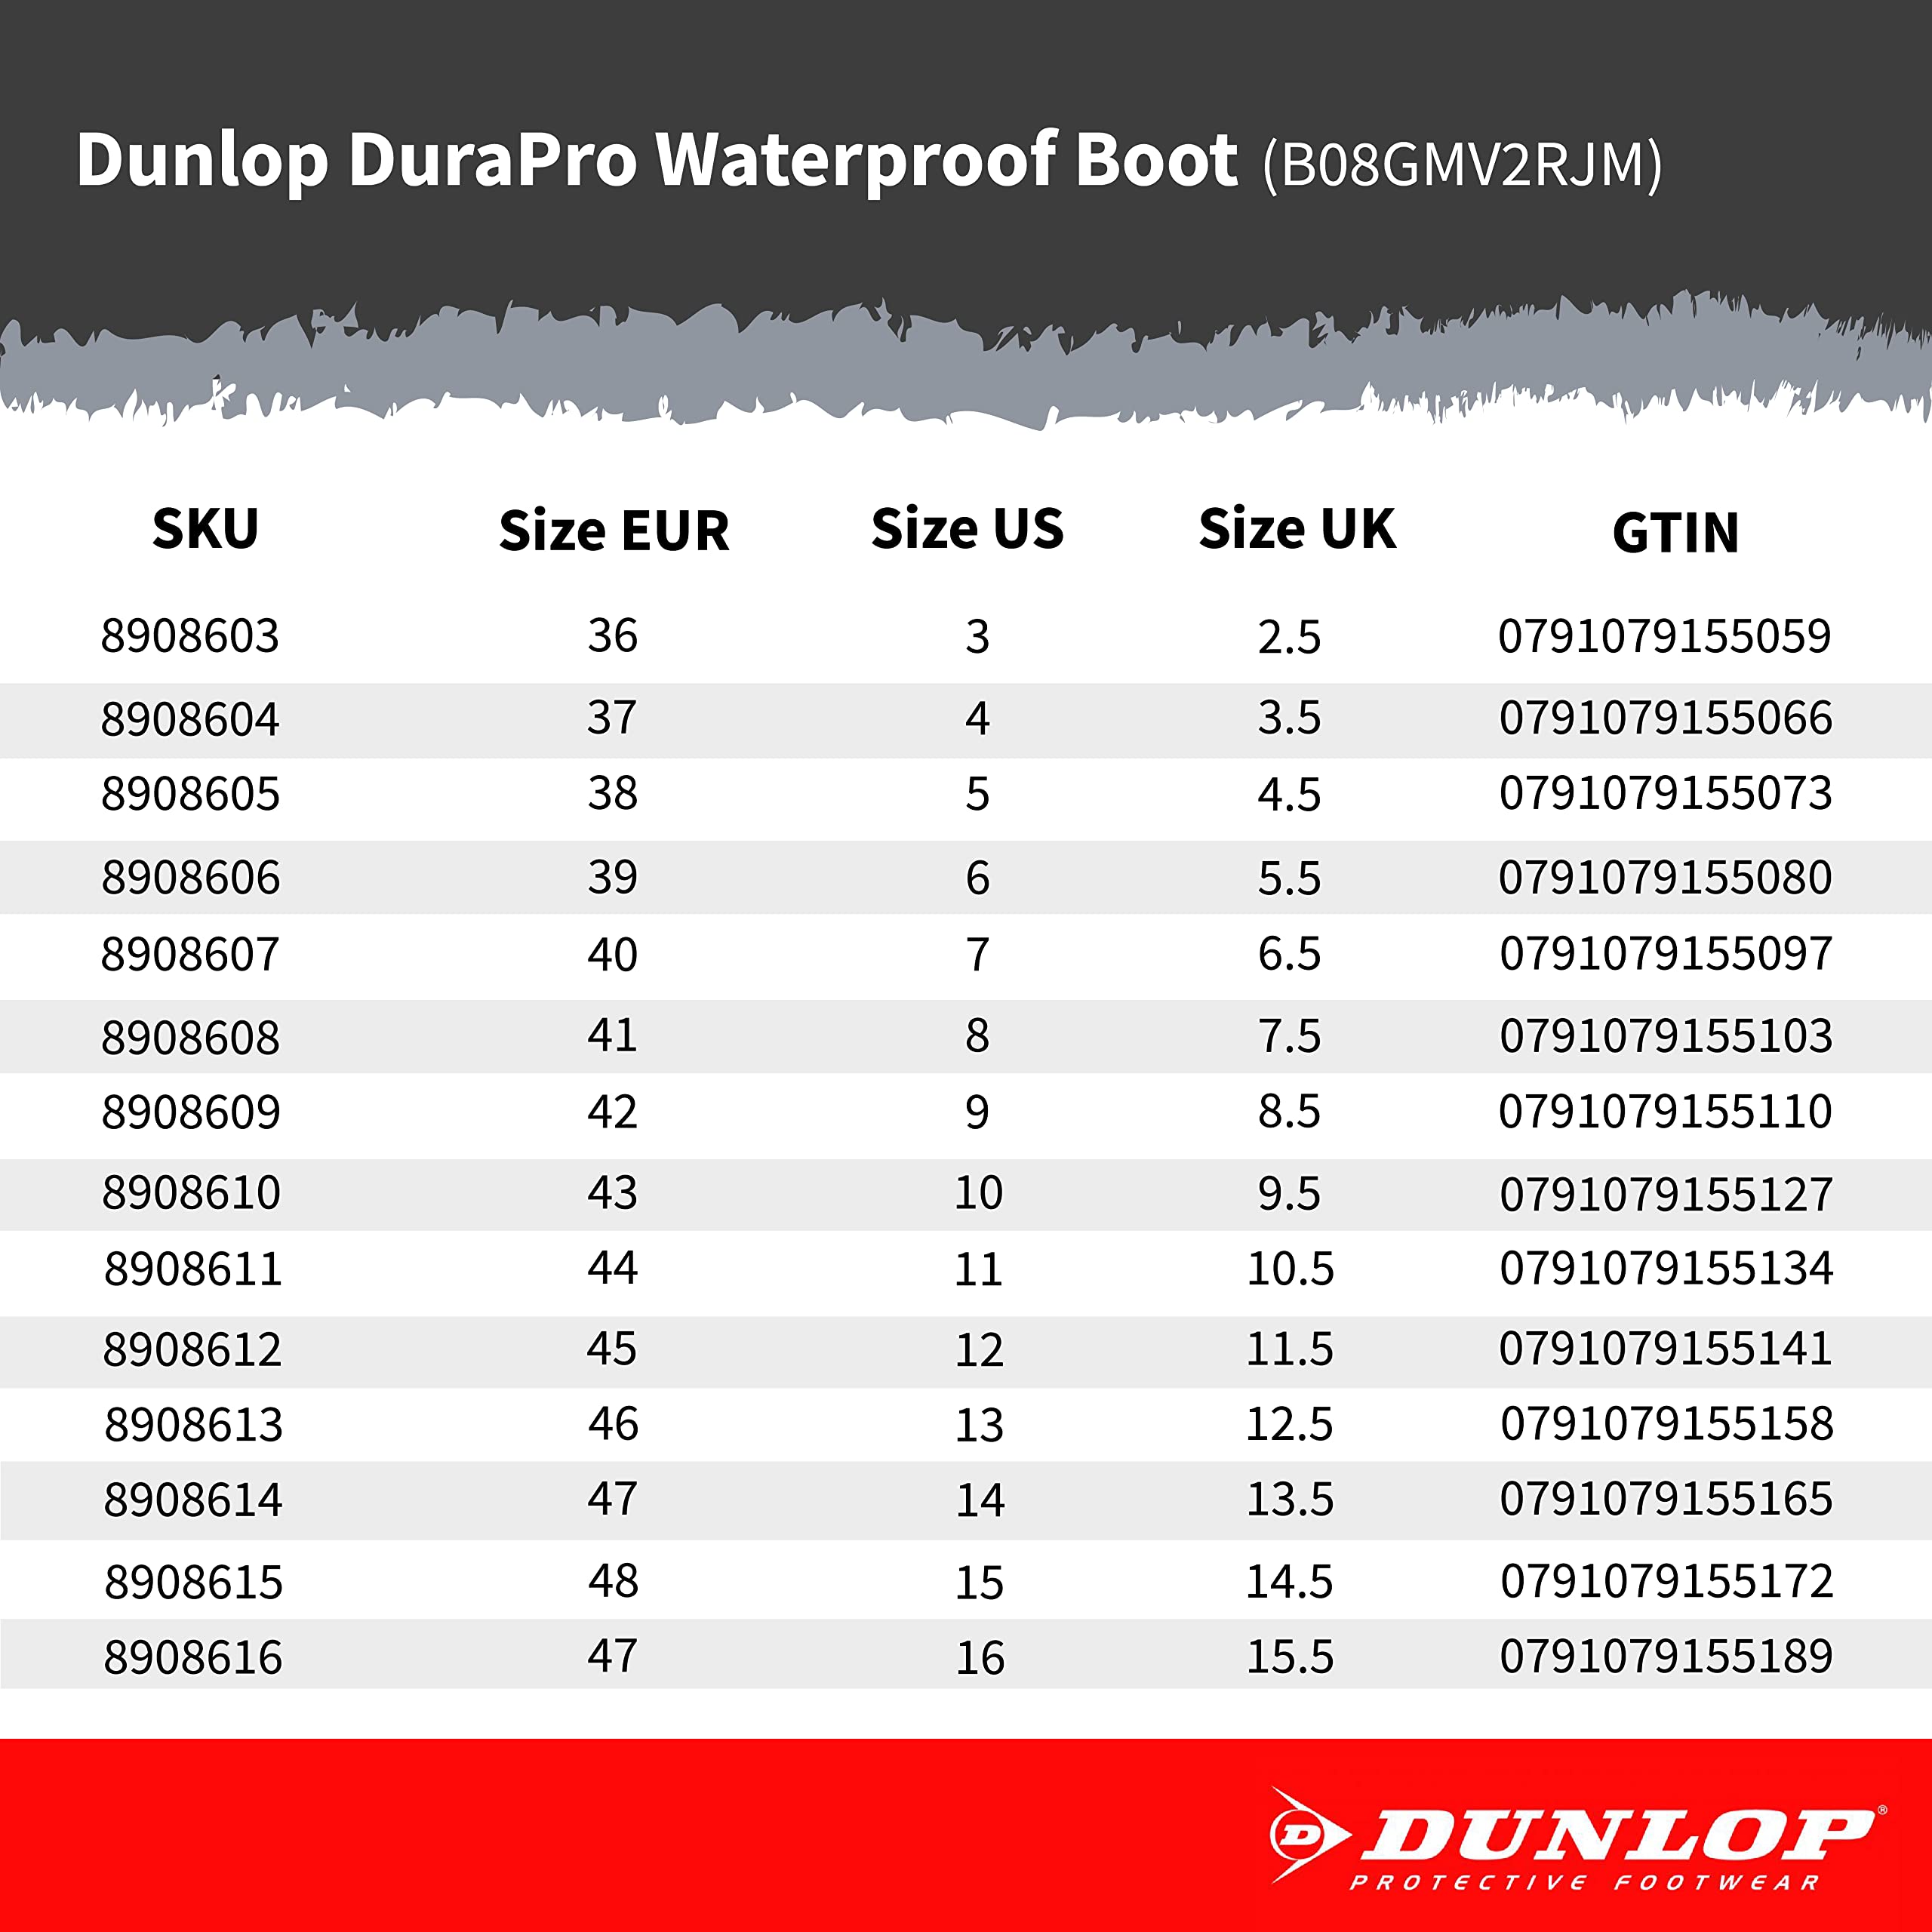 Dunlop Protective Footwear,Durapro Steel Toe, 100% Waterproof Polyblend PVC Material, Comfortable DURAPRO Energizing Insoles, Lightweight and Durable8908600.08, Size 8 US